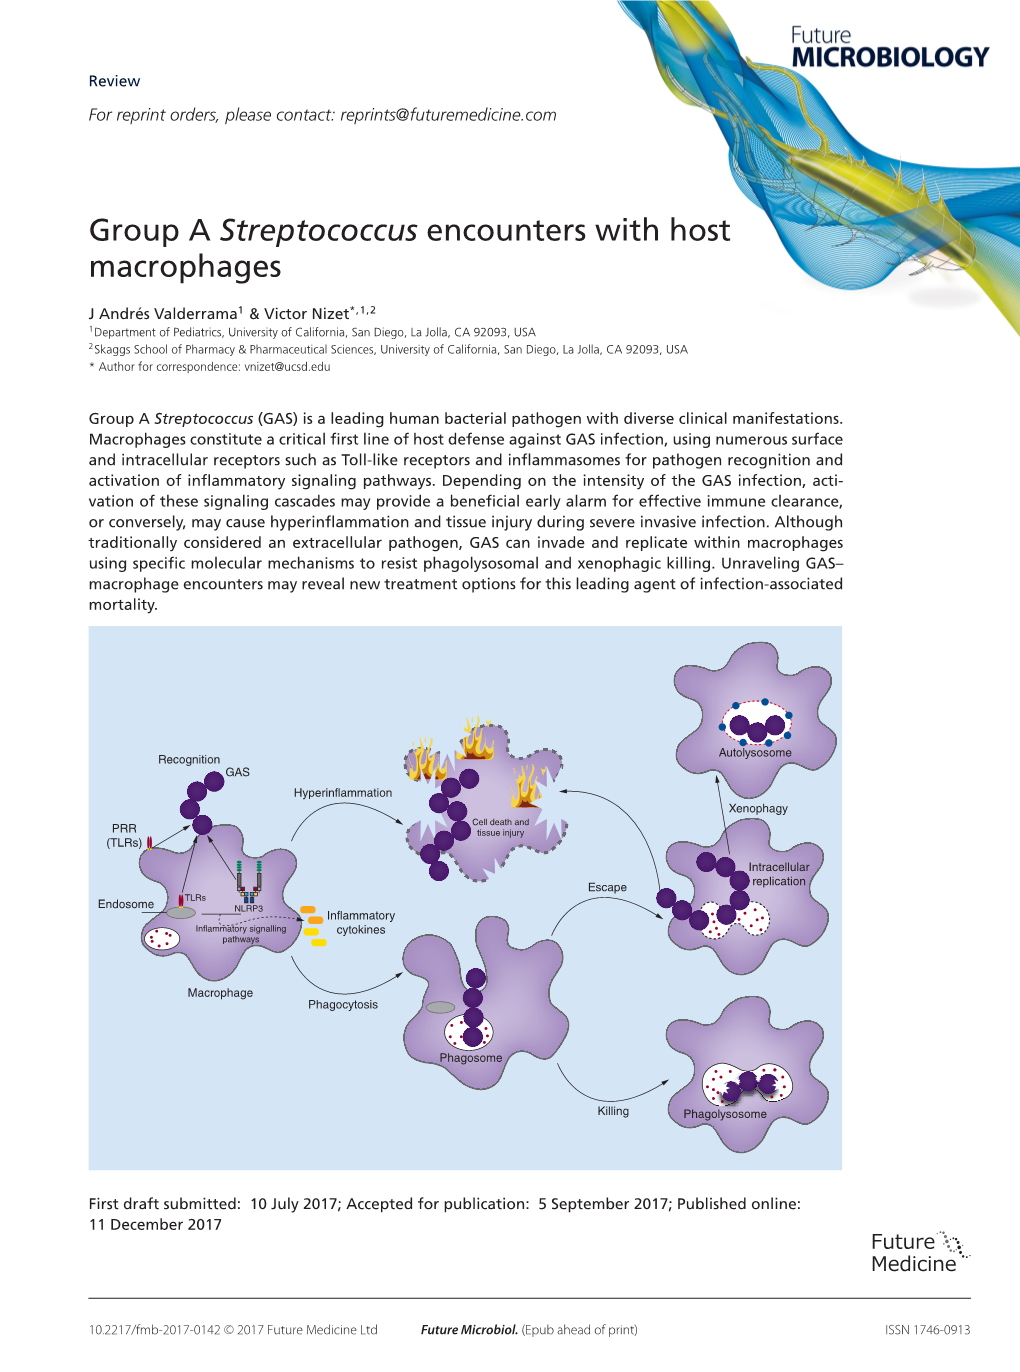 Group a Streptococcus Encounters with Host Macrophages